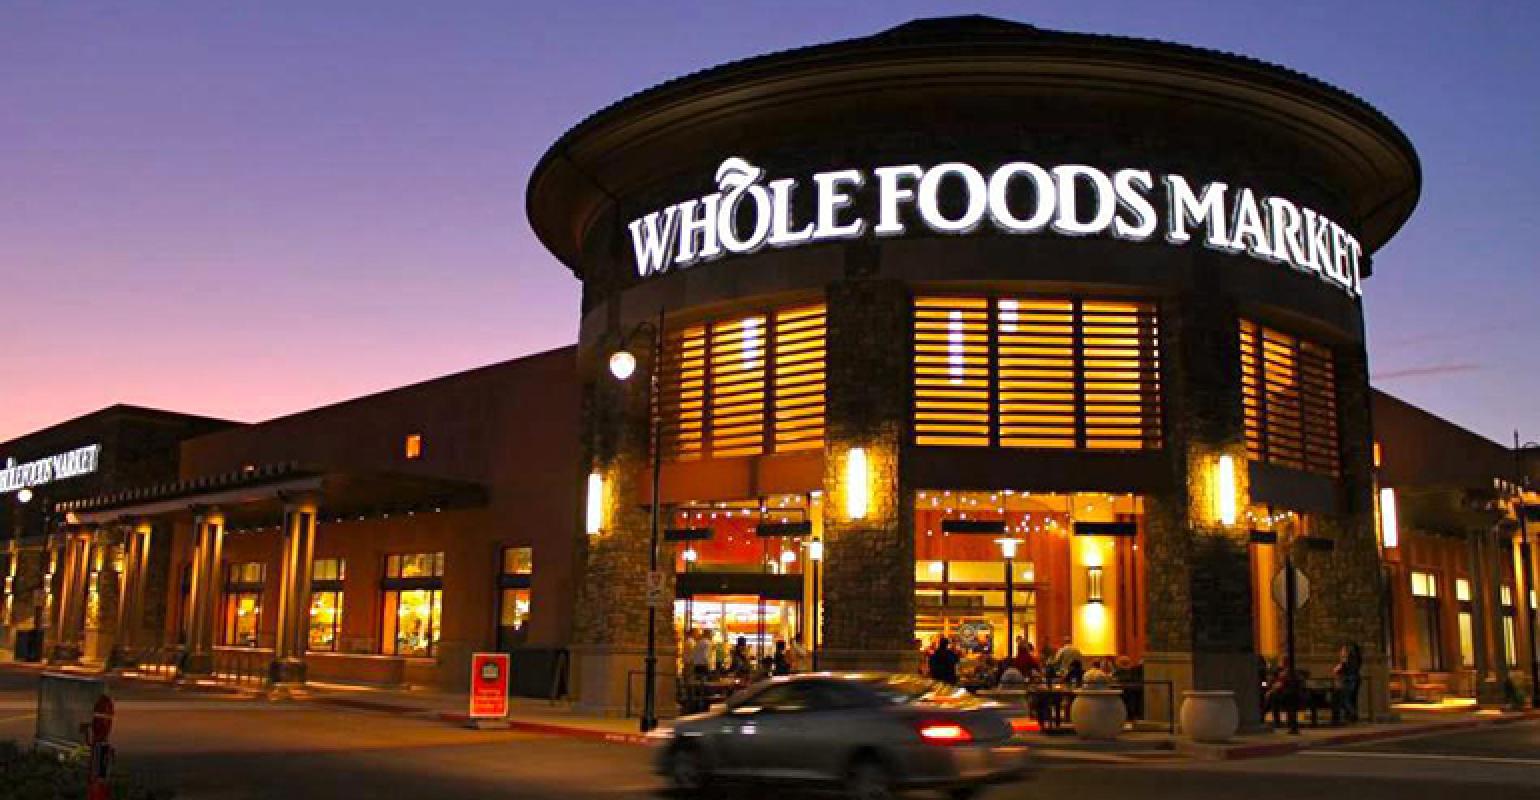 Enables Local Whole Foods Customers With Free 2-Hour Prime Delivery  - Eater SF